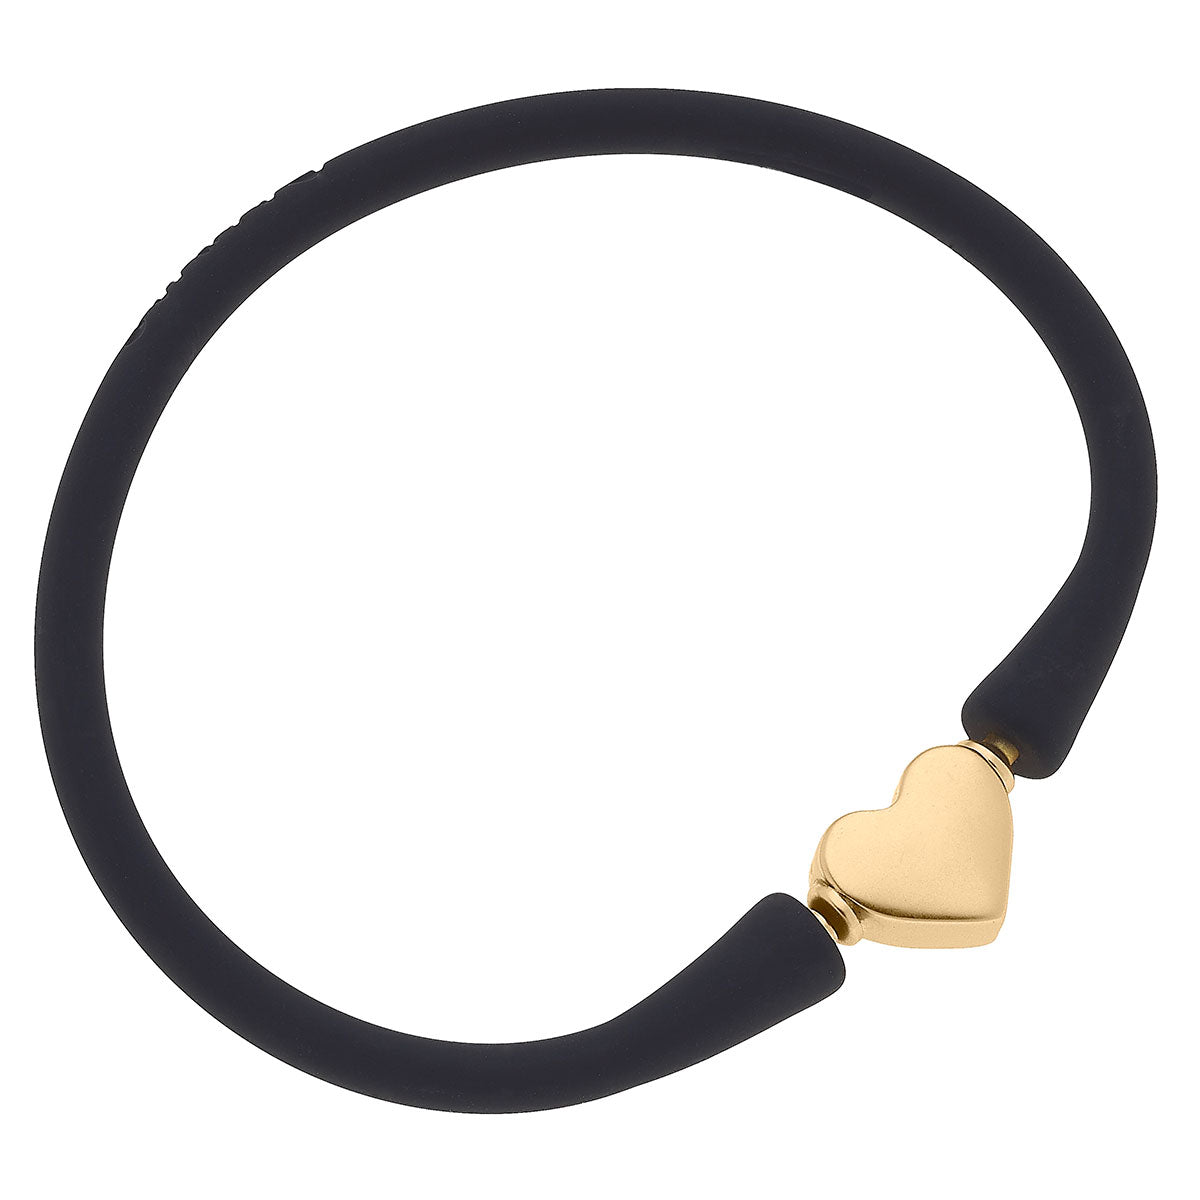 Gold heart charm with black silicone band bracelet